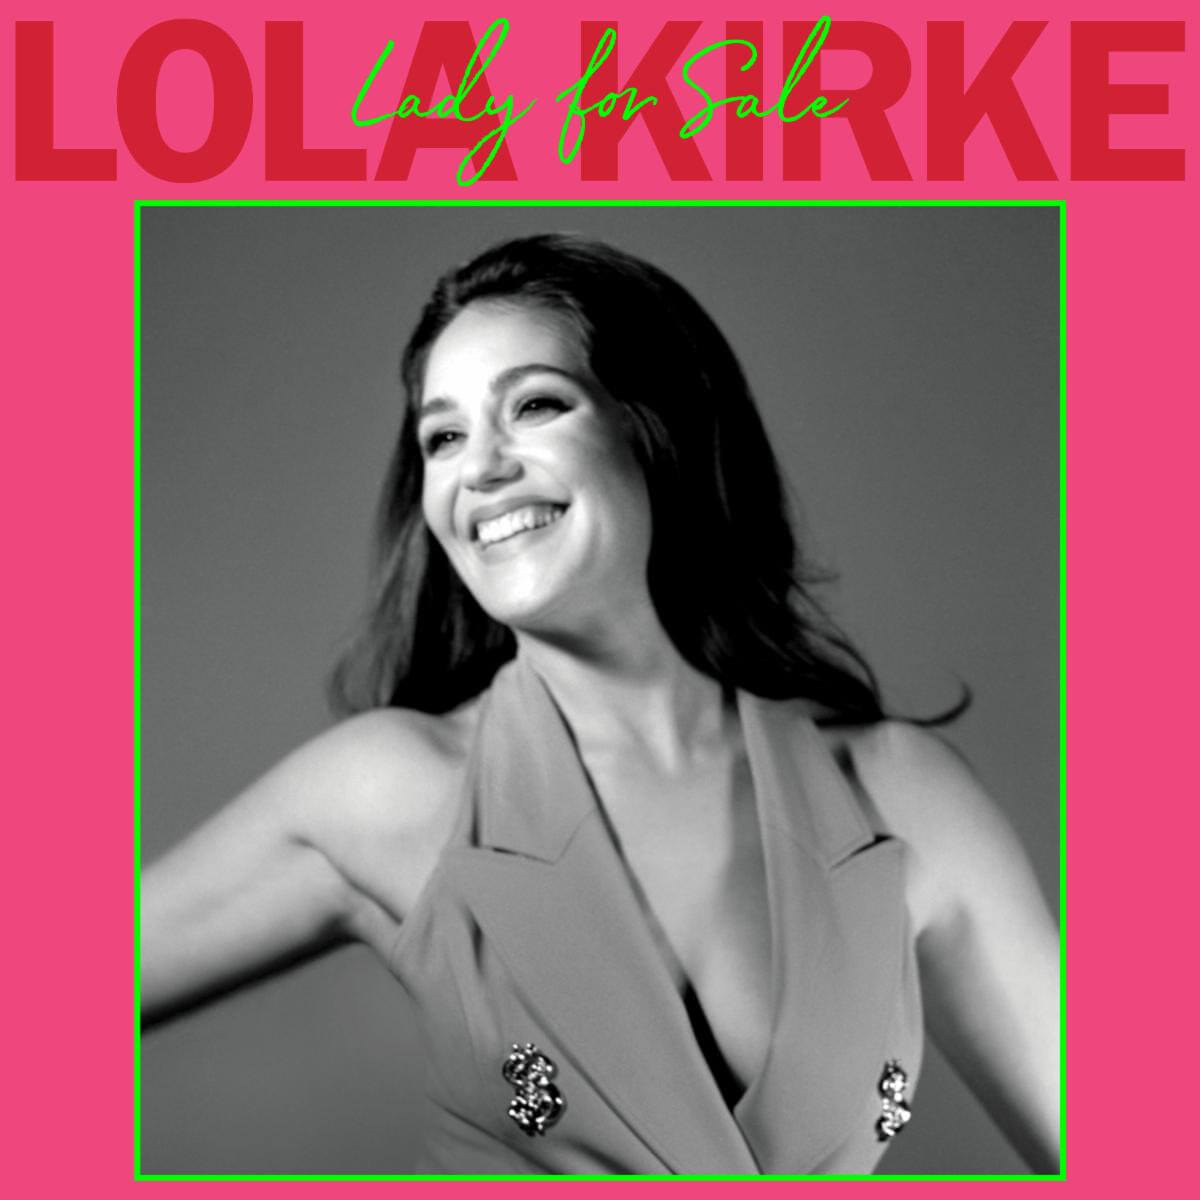 Musician/actress Lola Kirke has released the second single “Broken Families.” The track is off her Lady For Sale, available April 29, 2022